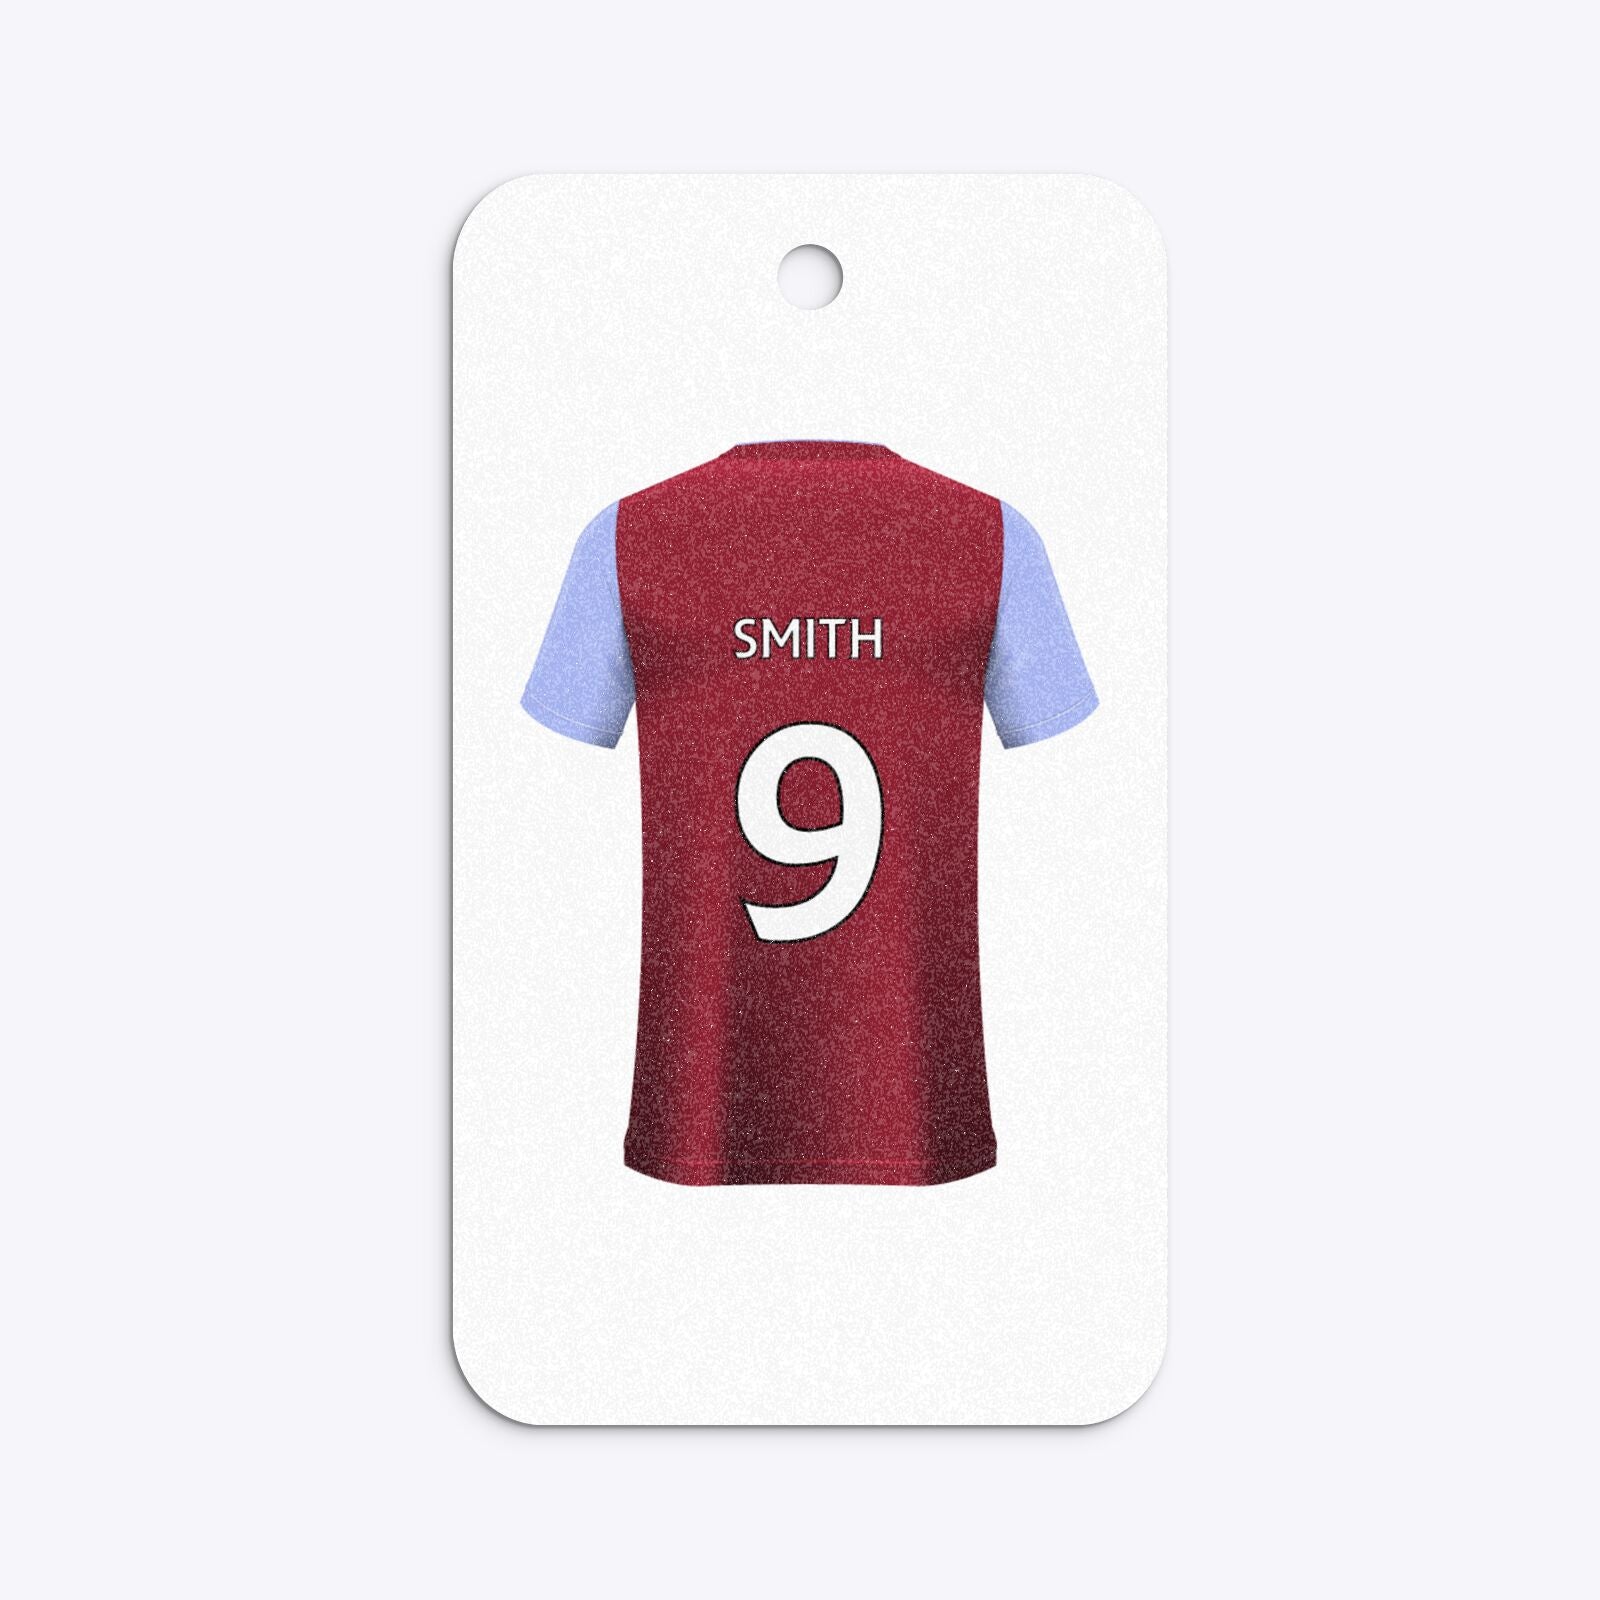 Claret and Blue Personalised Football Shirt Rounded Rectangle Glitter Gift Tag